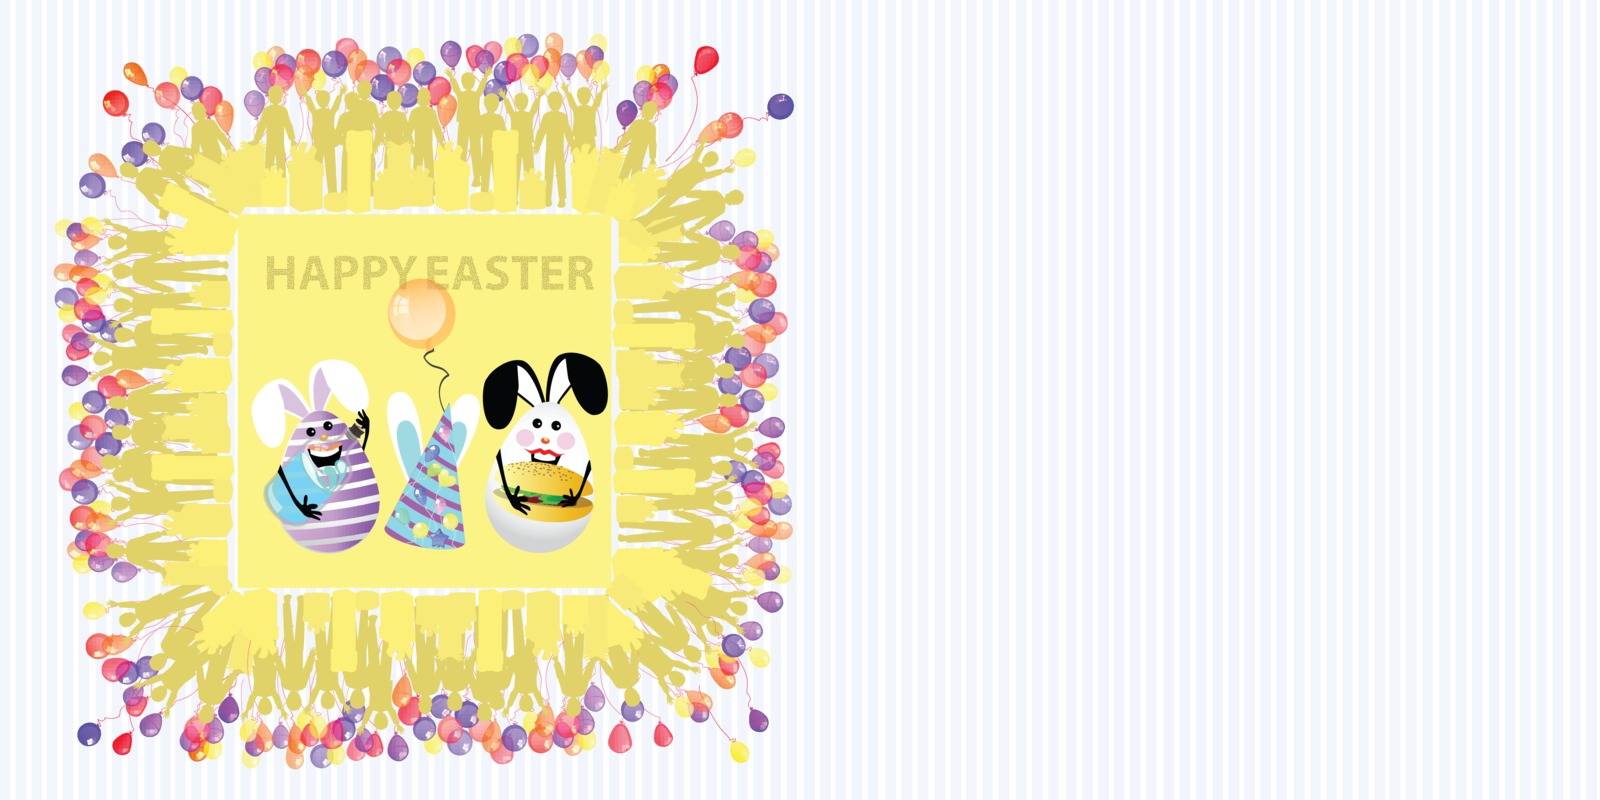 Easter illustration with place for text. Eggs with an air ball, buns and a cap on the background of a striped horizontally oriented sheet and a square frame